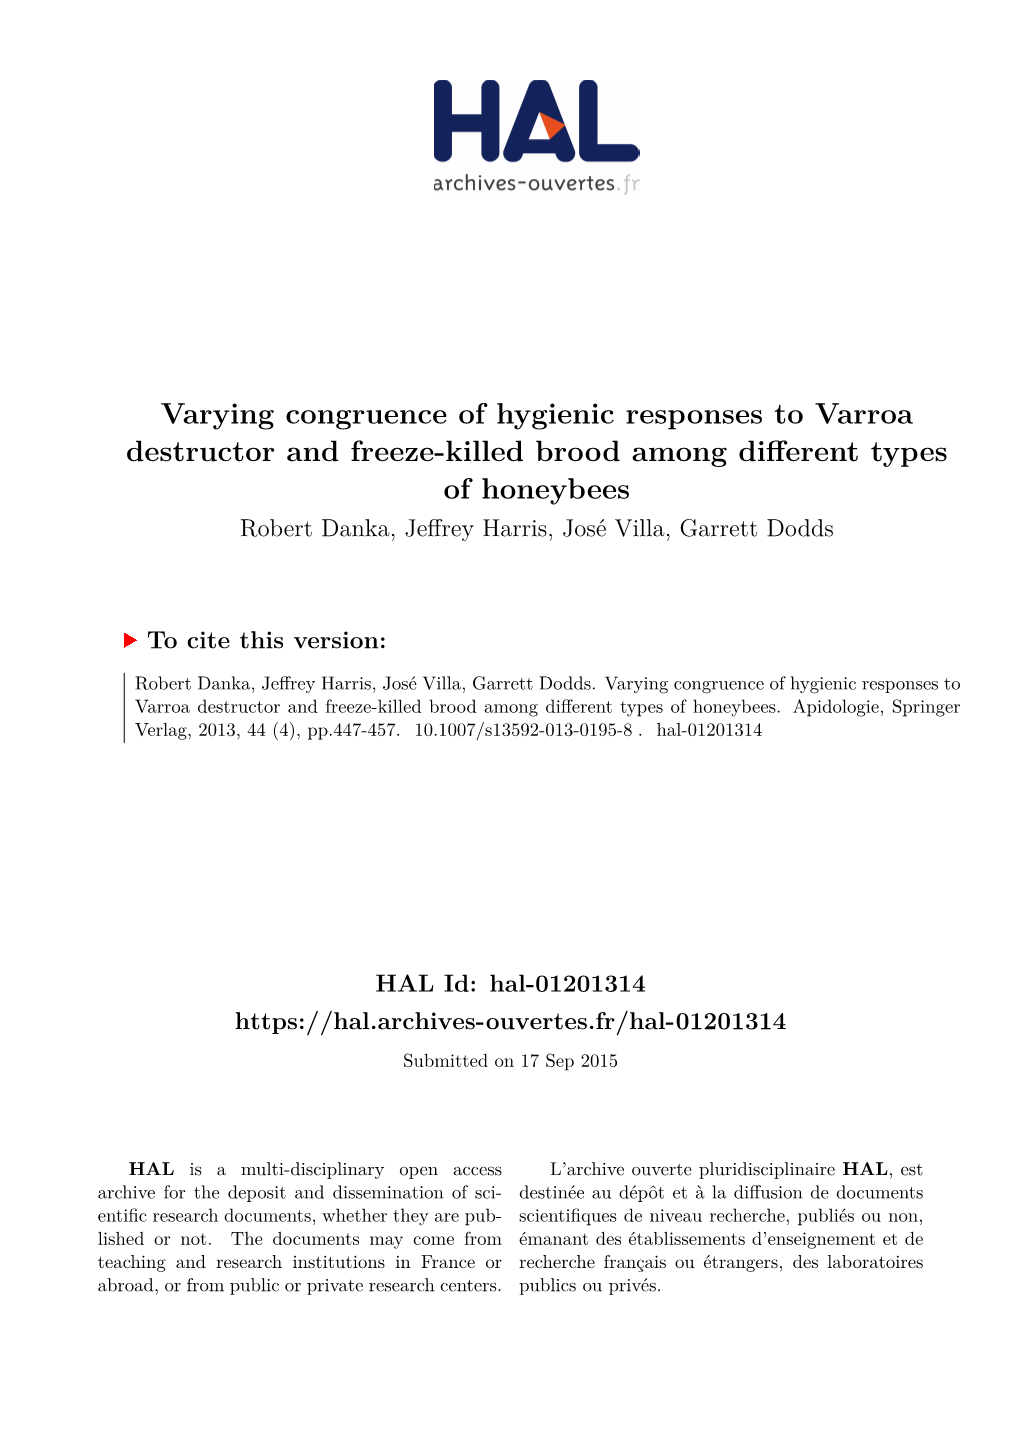 Varying Congruence of Hygienic Responses to Varroa Destructor And